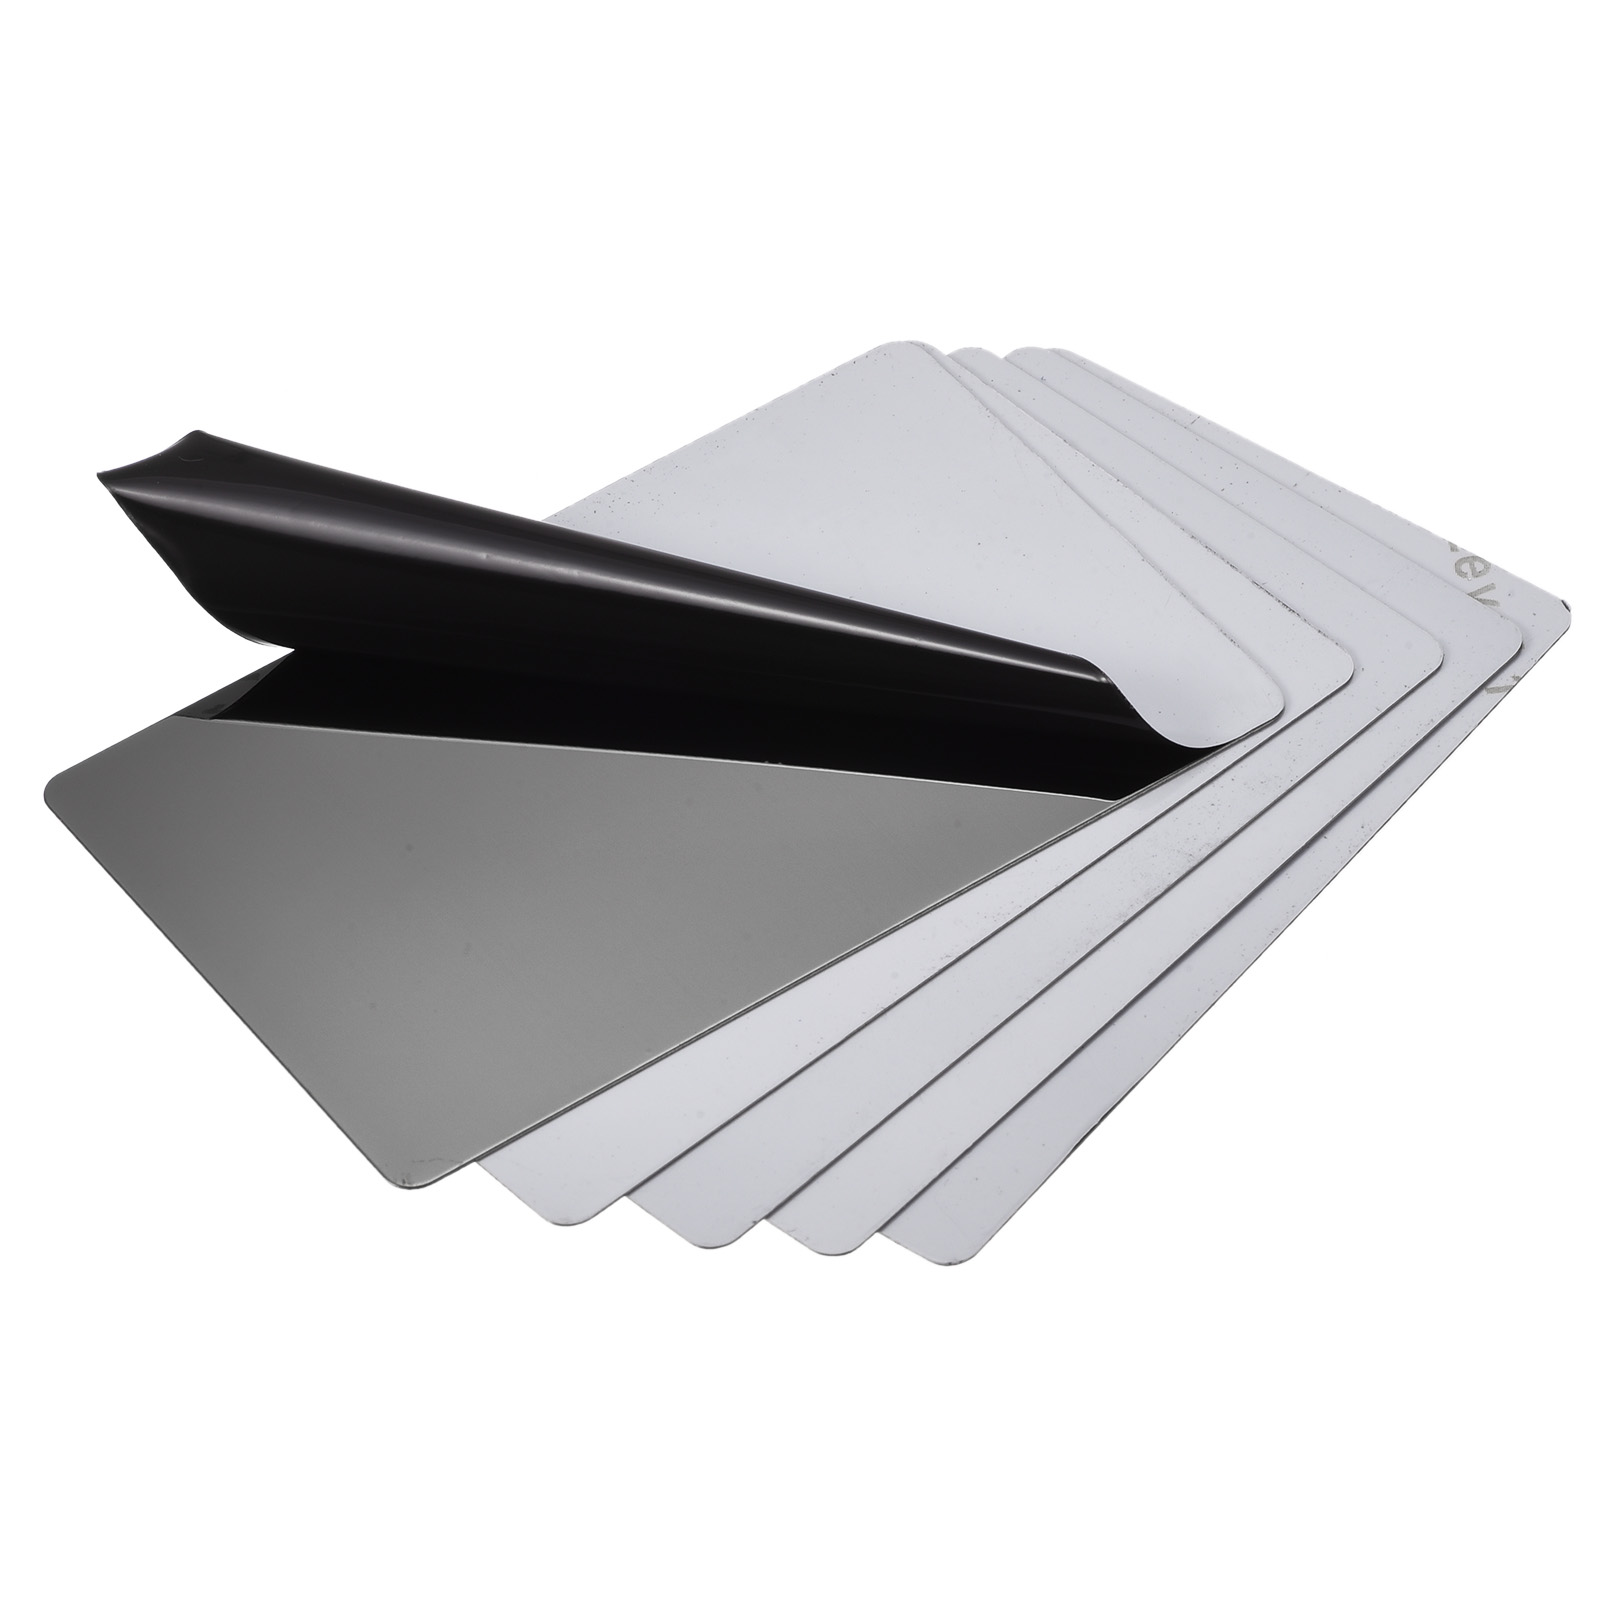 Uxcell 80x50x0.4mm 201 Stainless Steel Polishing Blank Metal Card Dark Gray 10 Pack - image 1 of 6